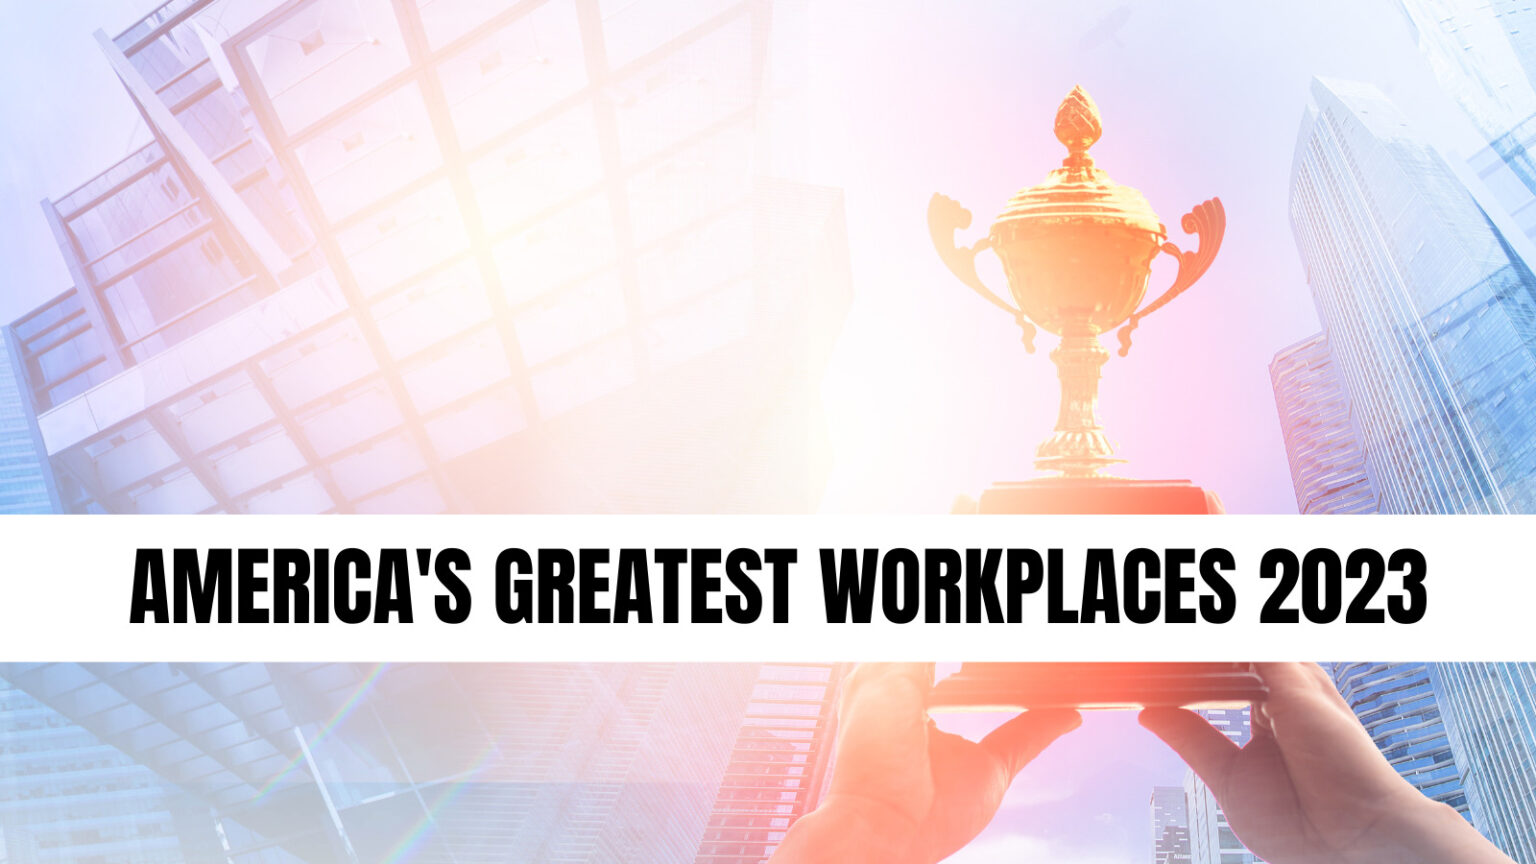 3 Springfield Businesses named in Newsweek's America's Greatest